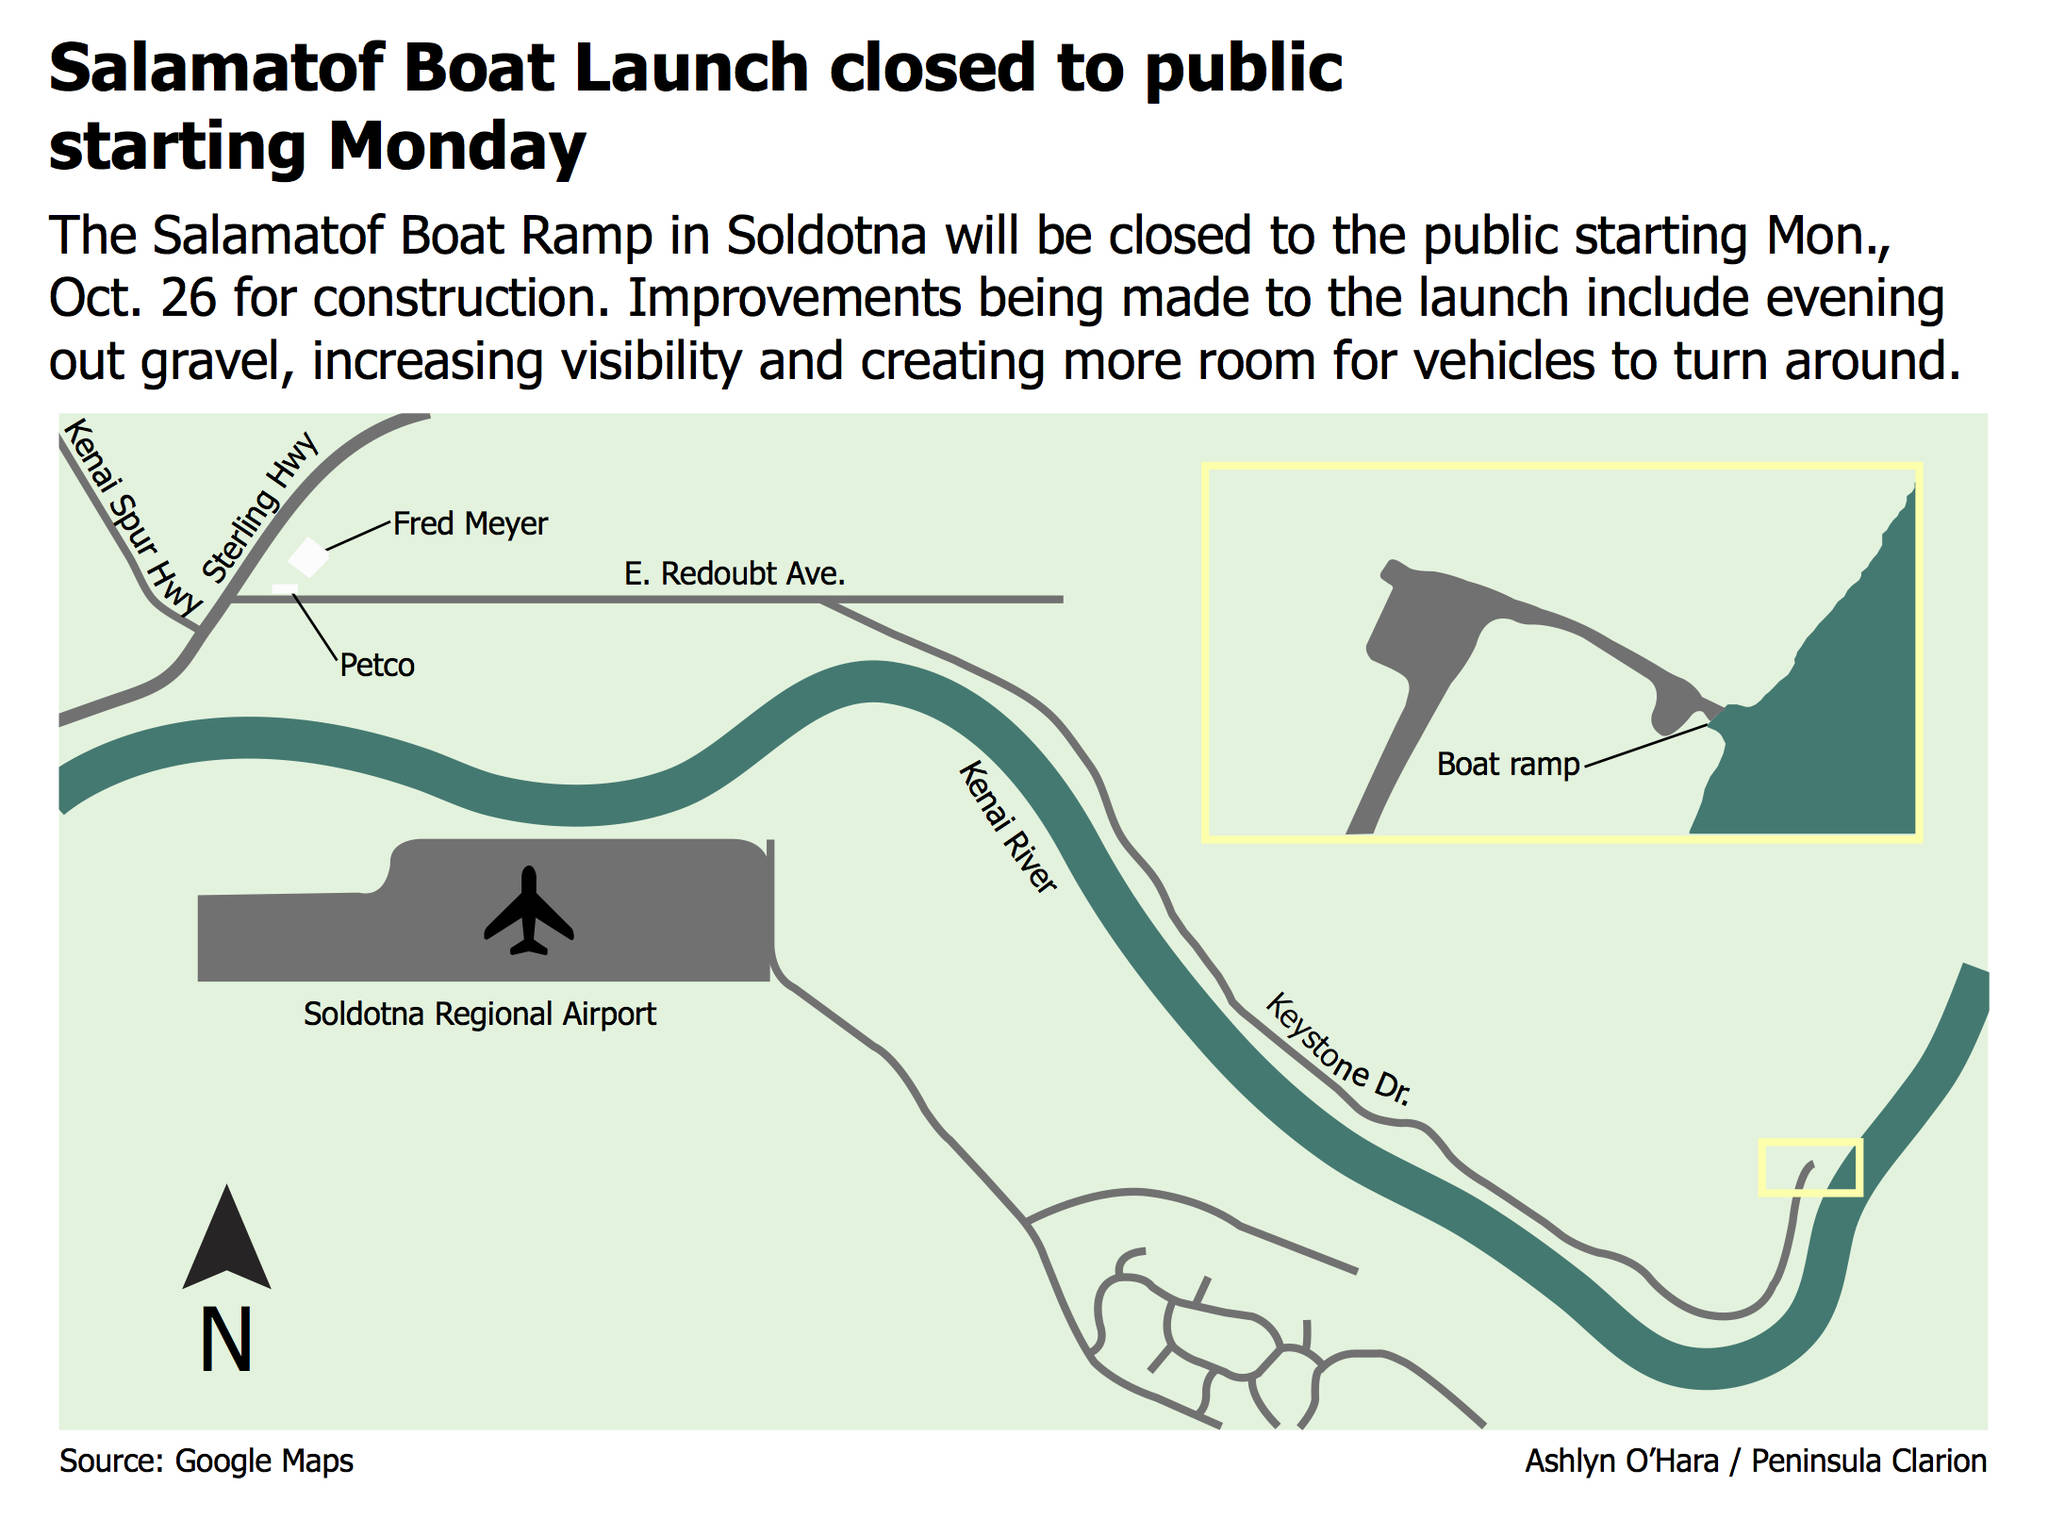 Graphic showing the location of the Salamatof Boat Launch.